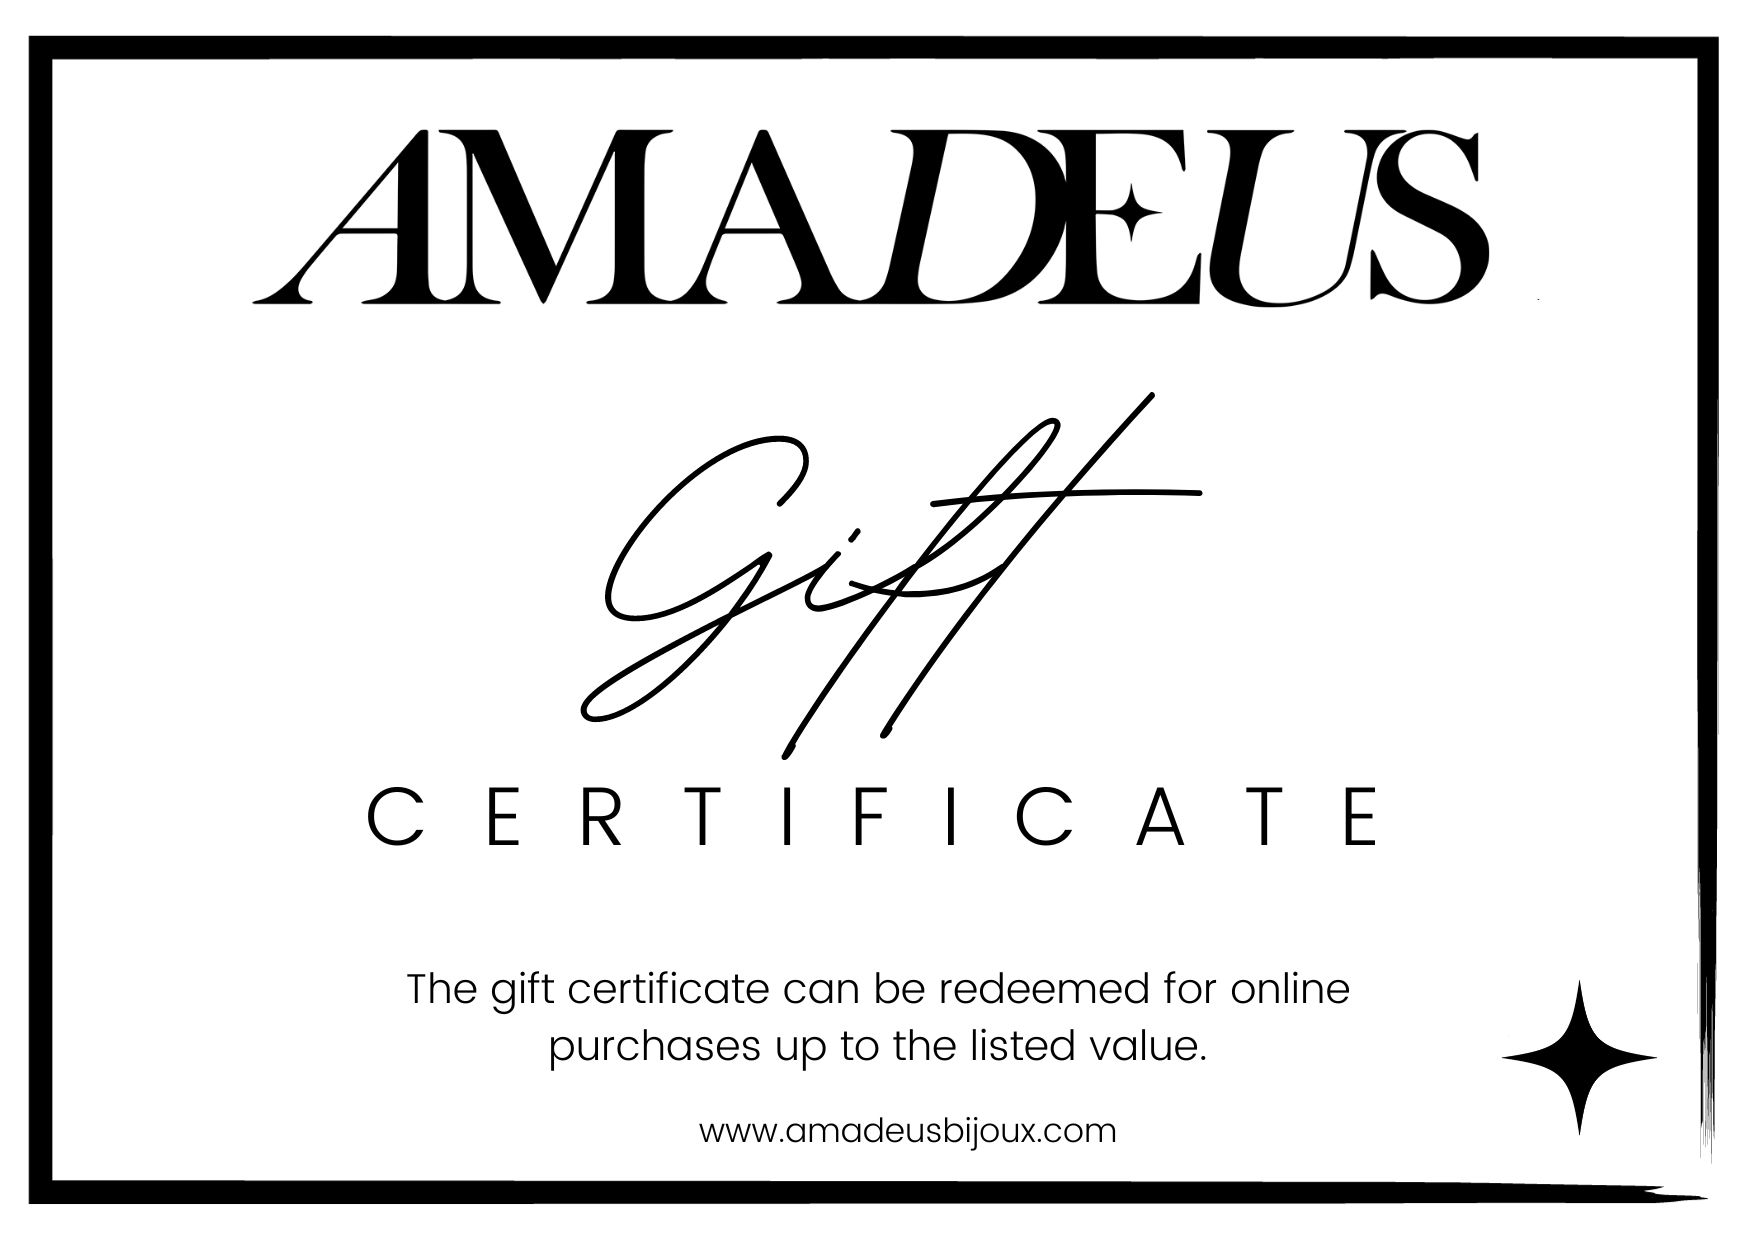 Give the gift of Amadeus! Select any denomination below and we will send you a digital discount code to use on the site